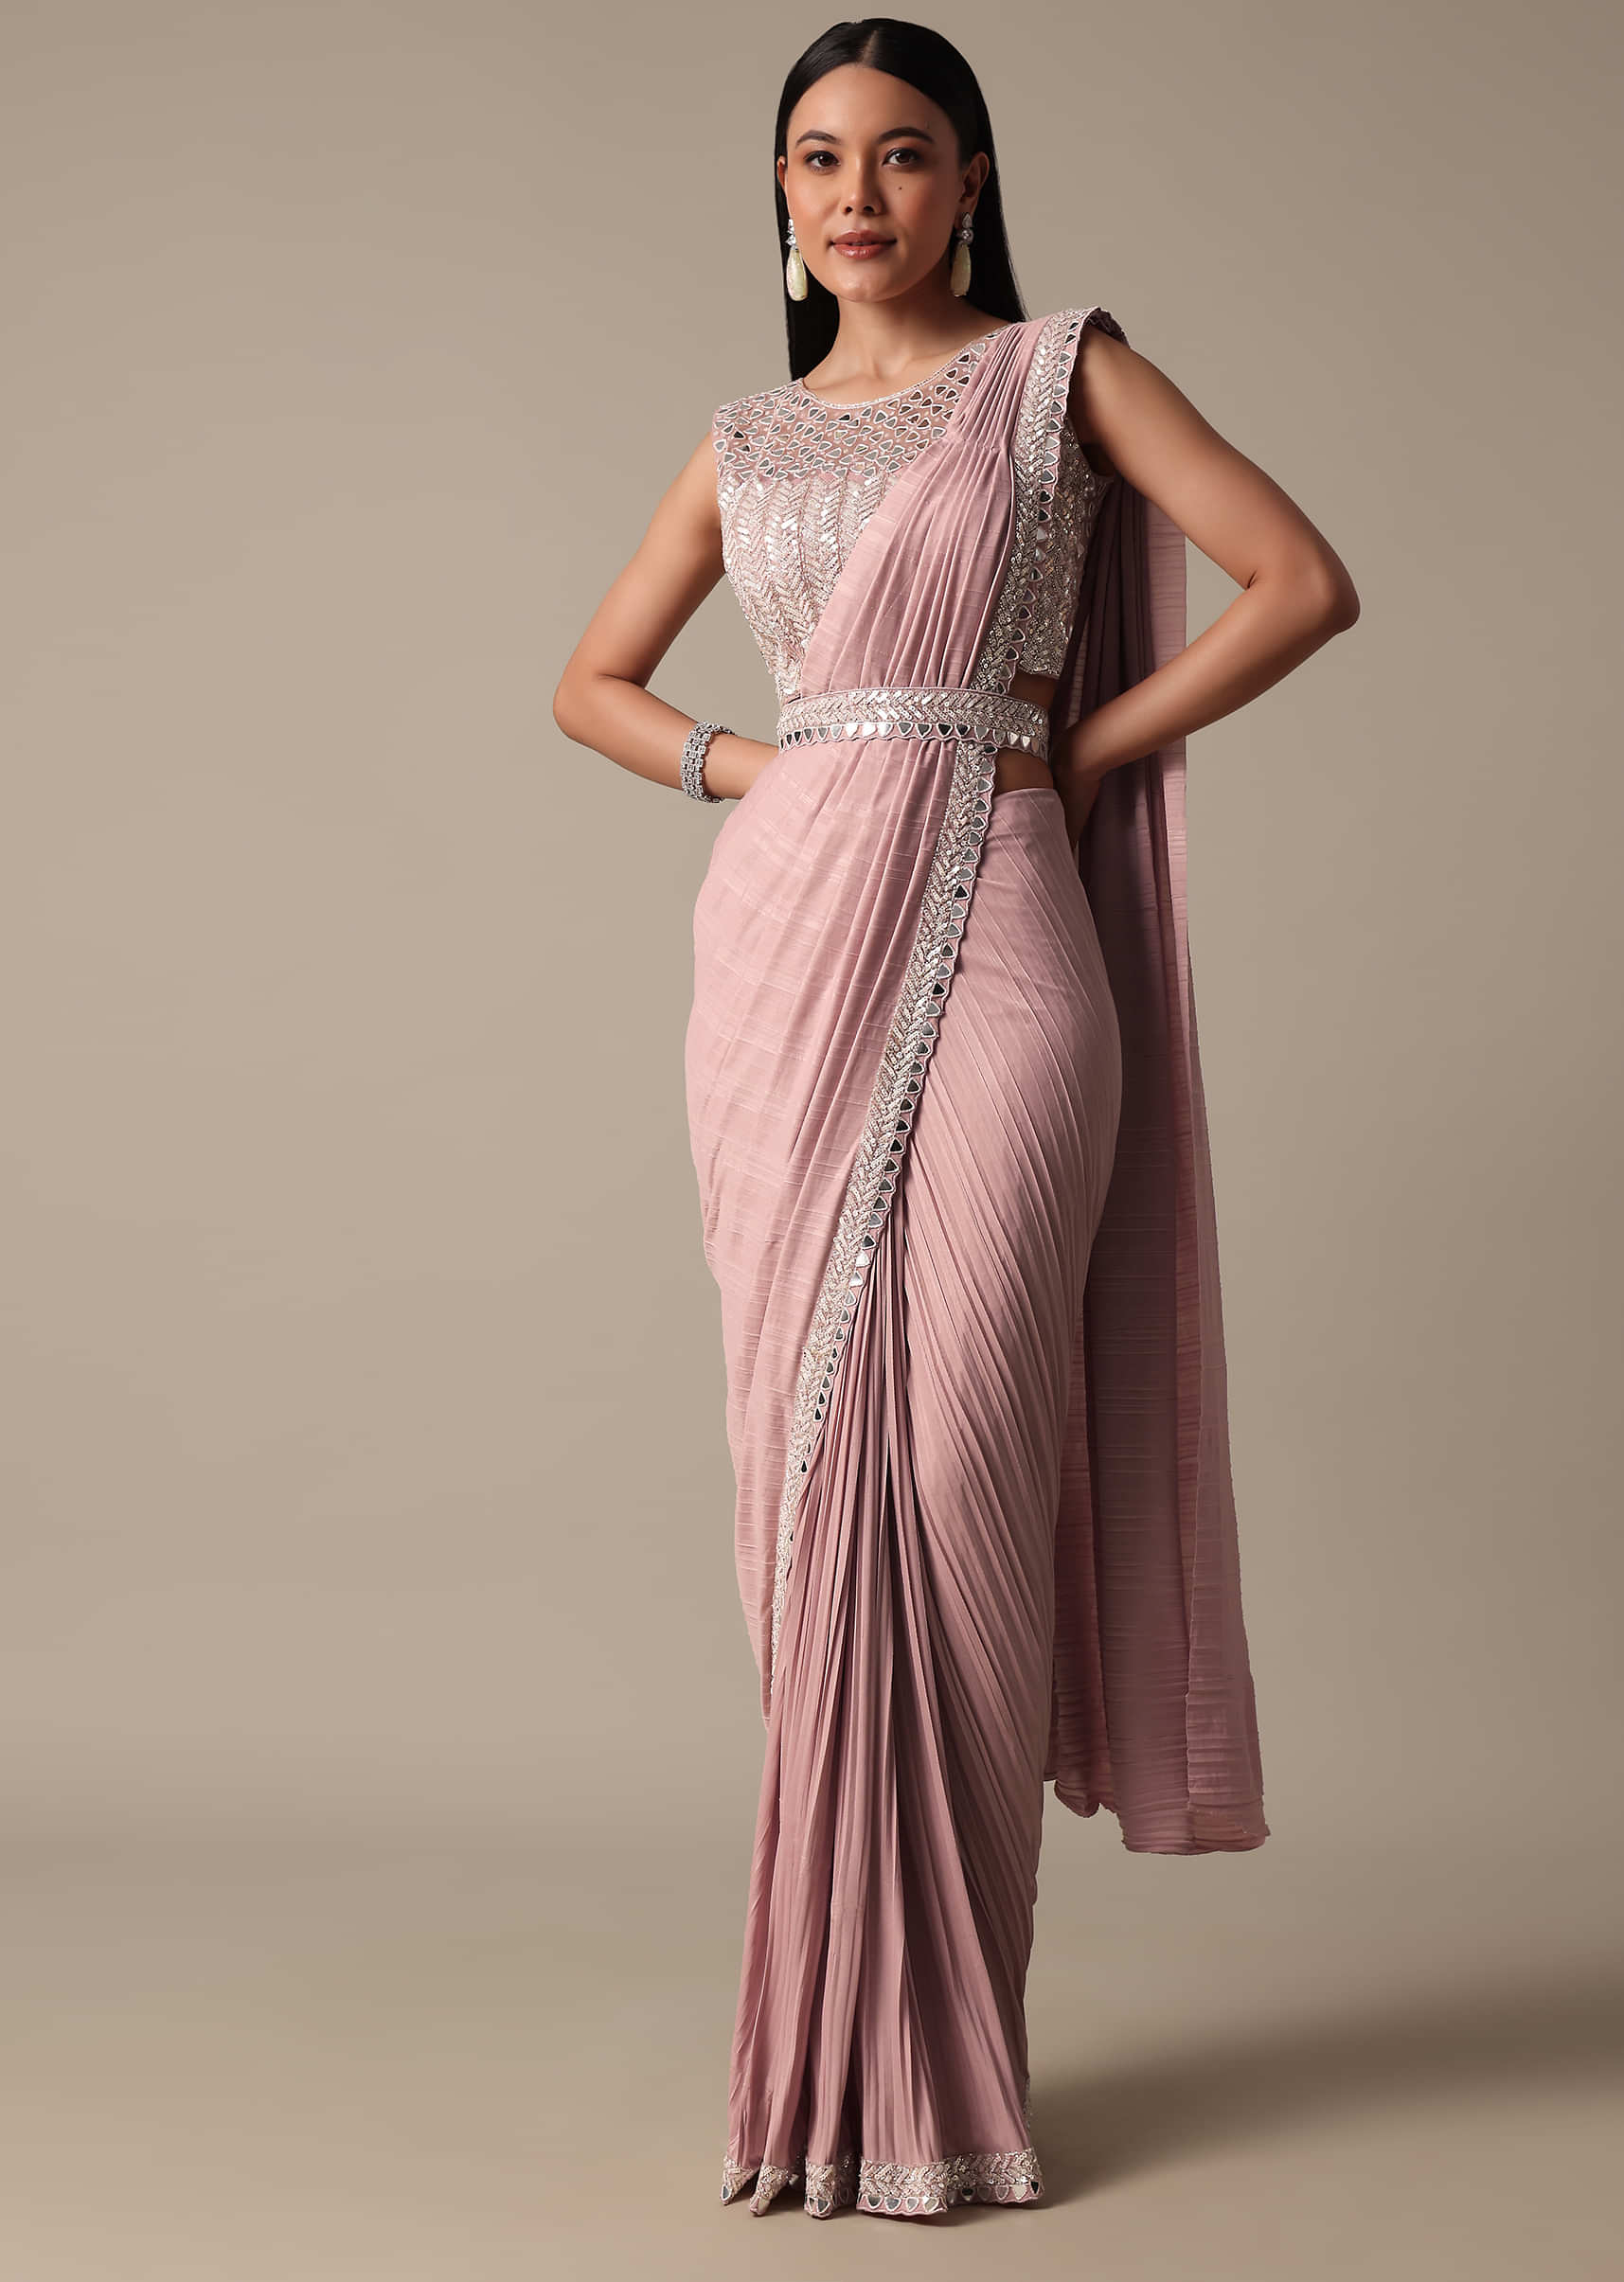 Series Of Party Wear Saree. When it comes to the party, every